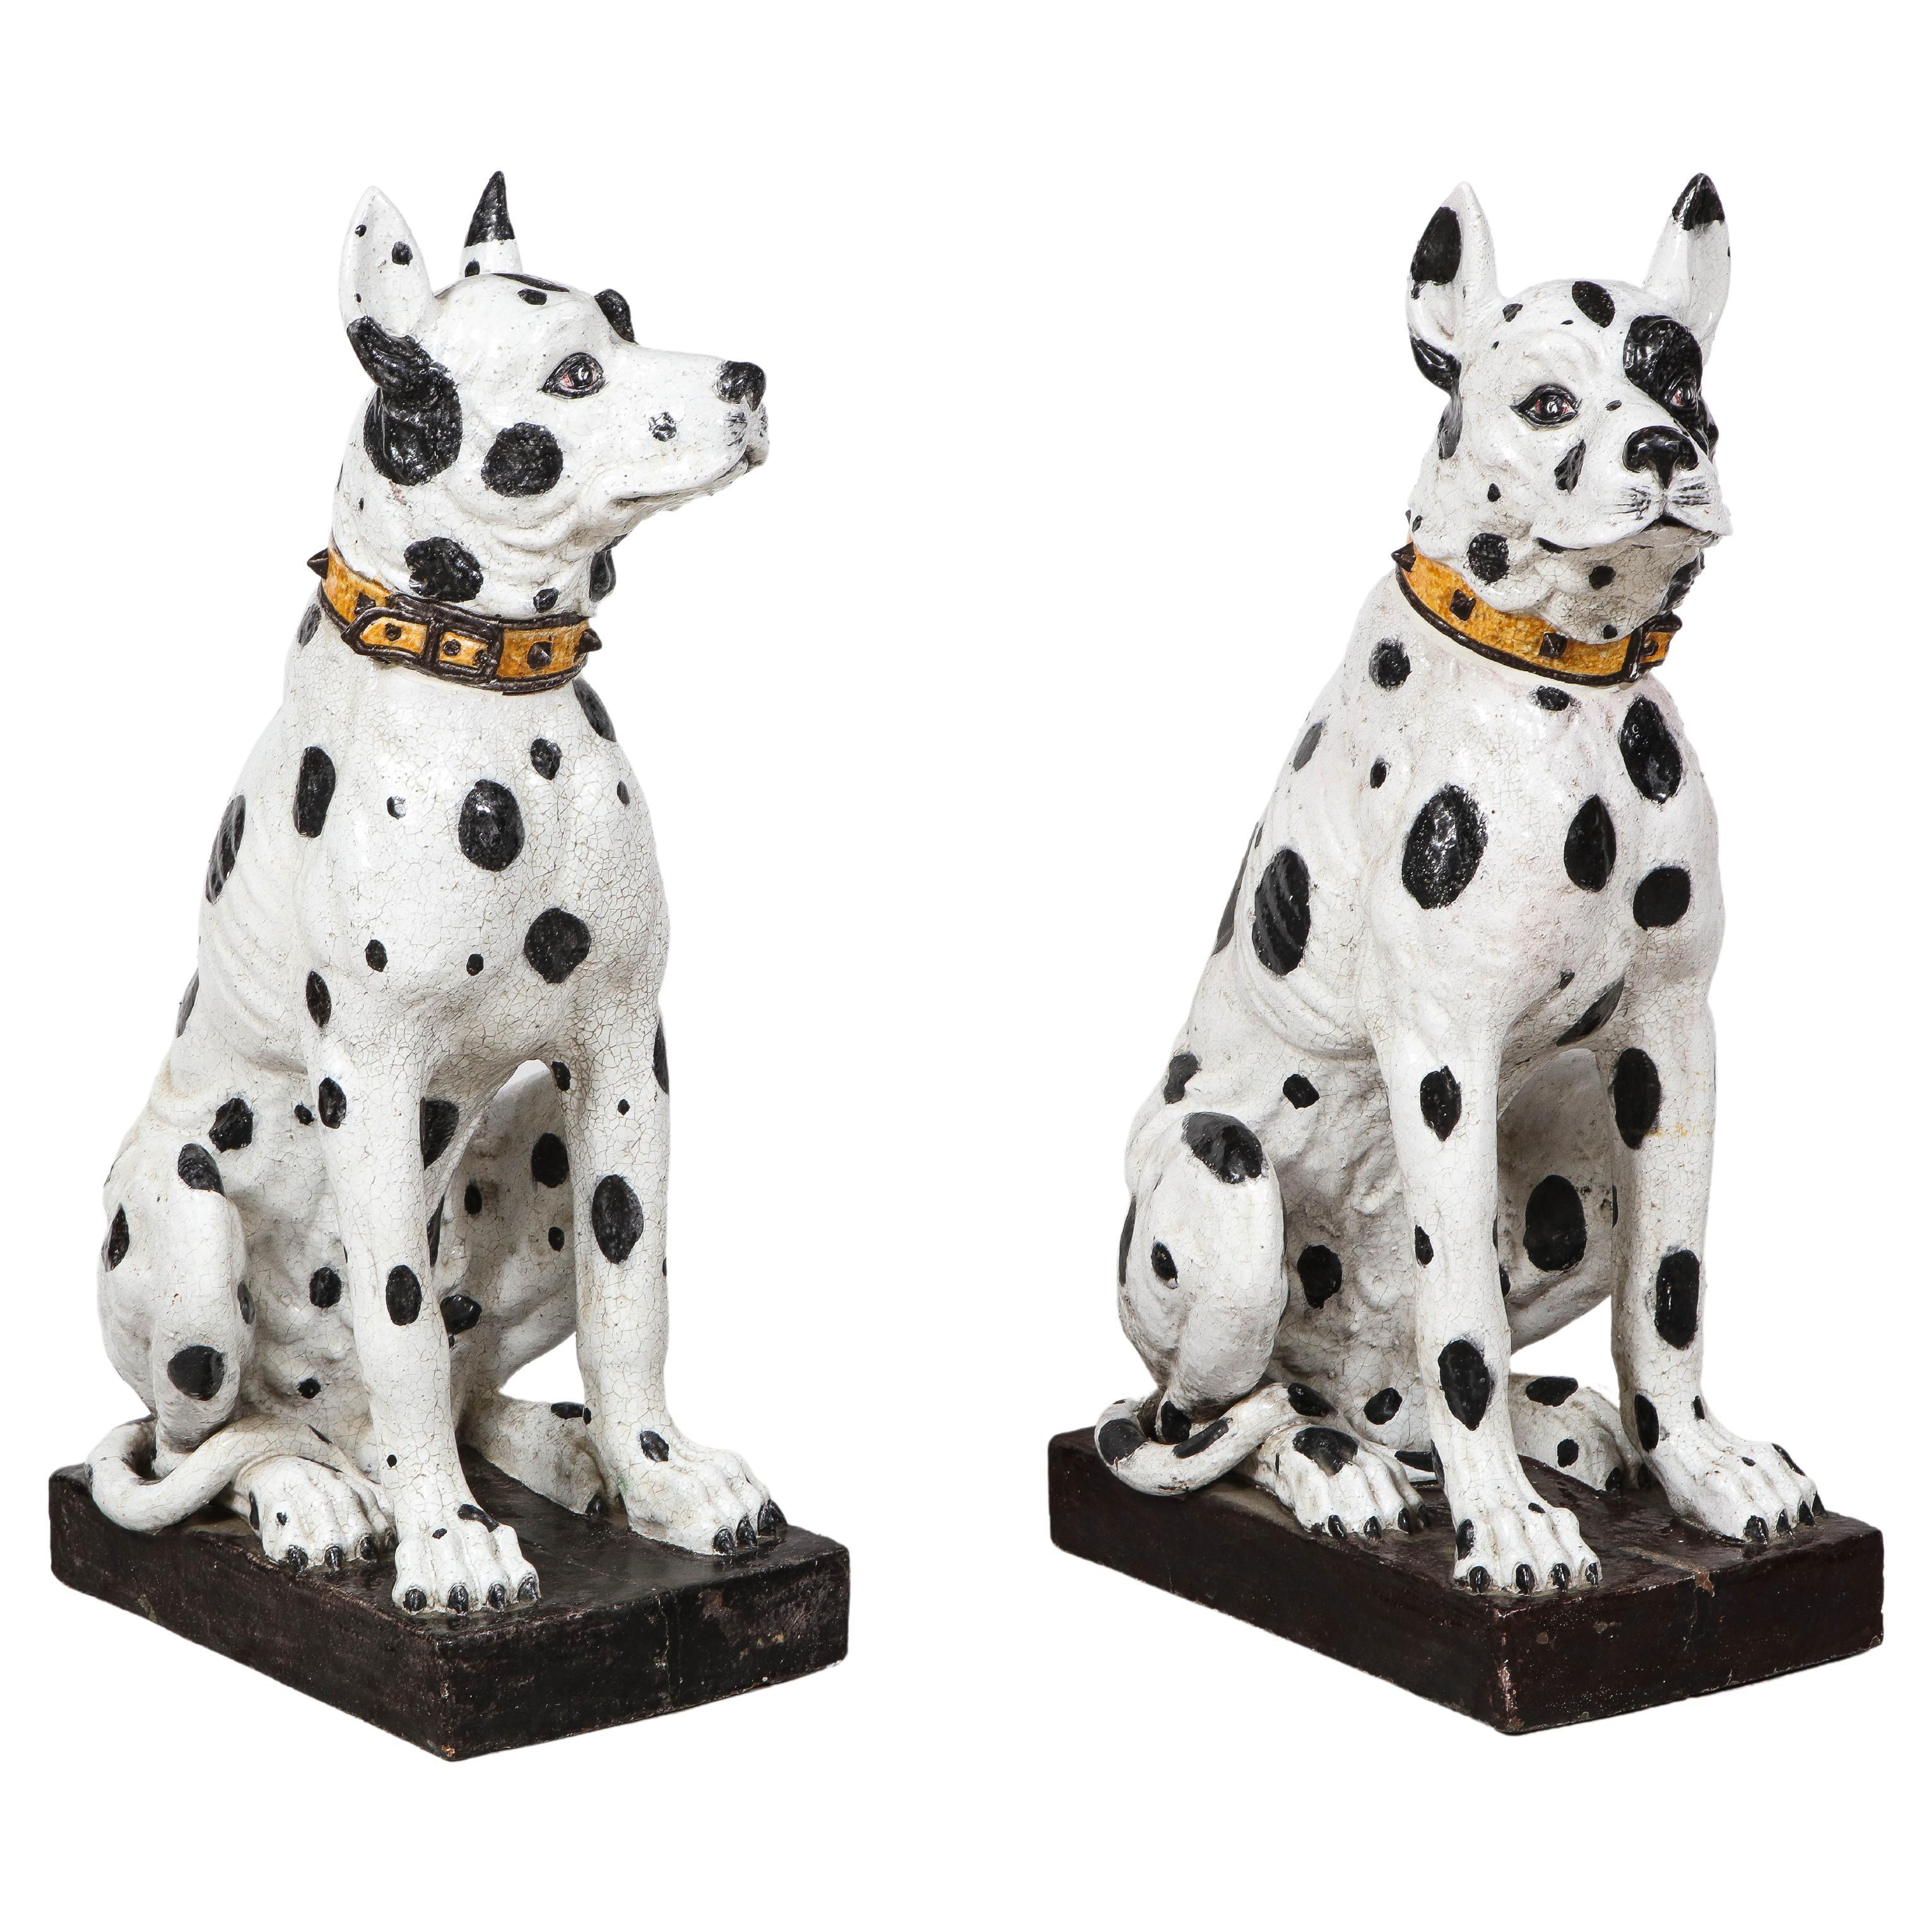 Pair of Life-Size Italian Black and White Great Dane Dog Ceramic Sculptures